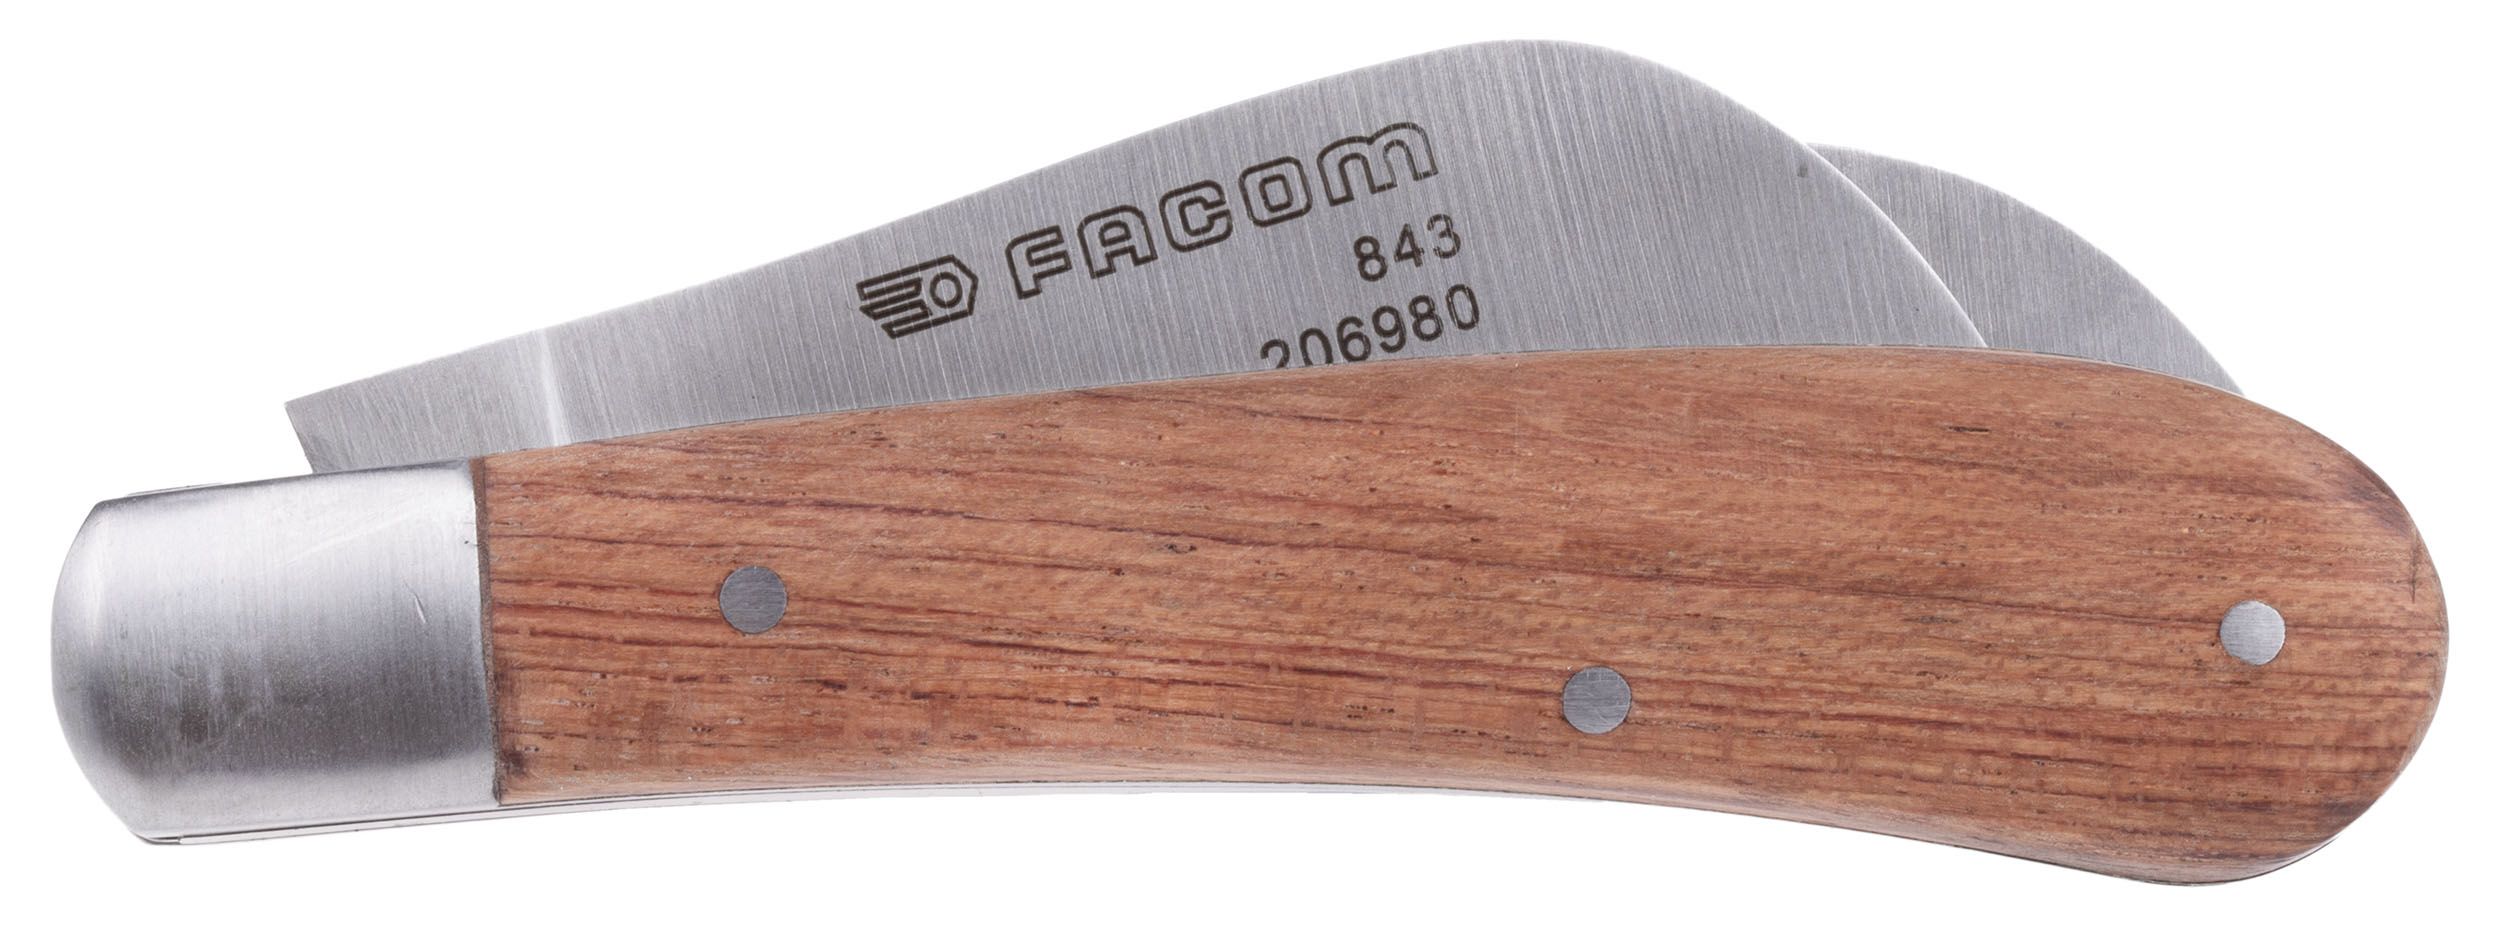 Facom Twin-Blade Twin Electrician Knife, 100mm Closed Length, 115g